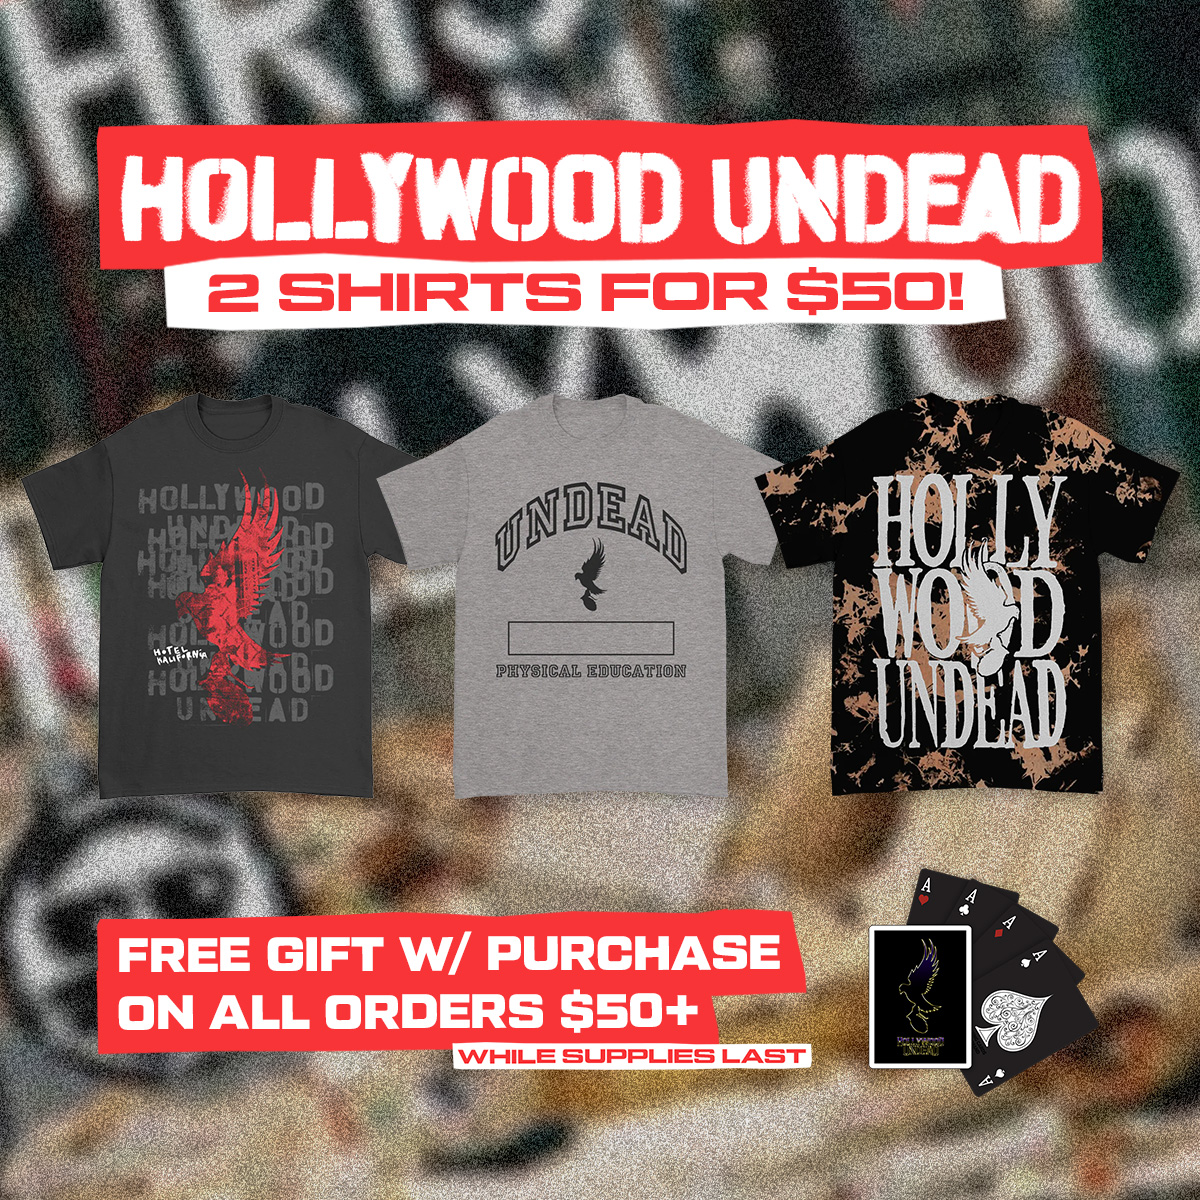 It’s the most wonderful sales of the year 🤑🎁 2 for $50 tees + a free gift! (only valid now-Sunday) PLUS 3 limited edition holiday bundles 🕊️ Shop now at store.hollywoodundead.com